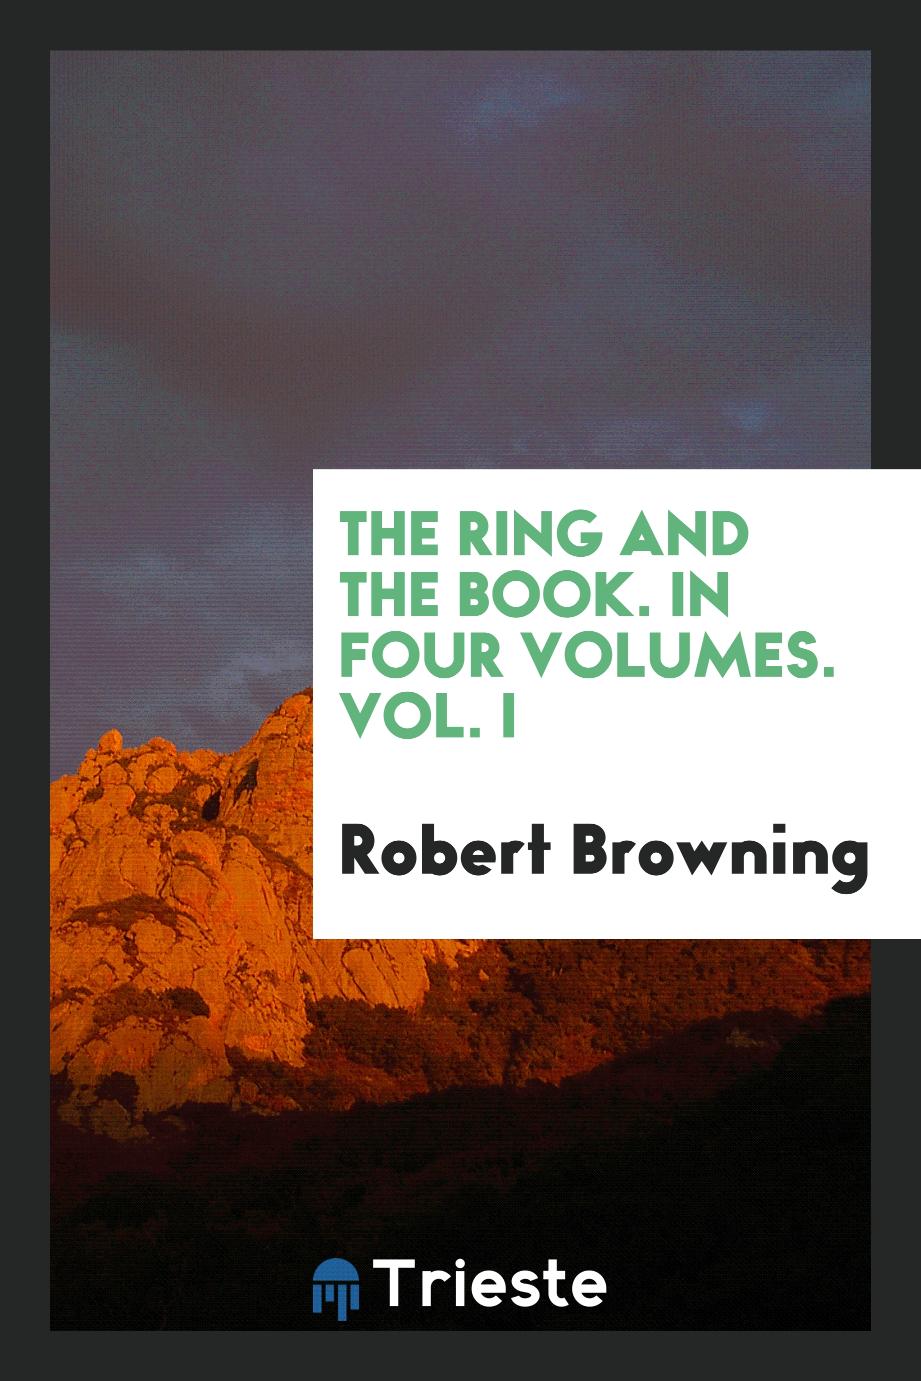 The ring and the book. In four Volumes. Vol. I